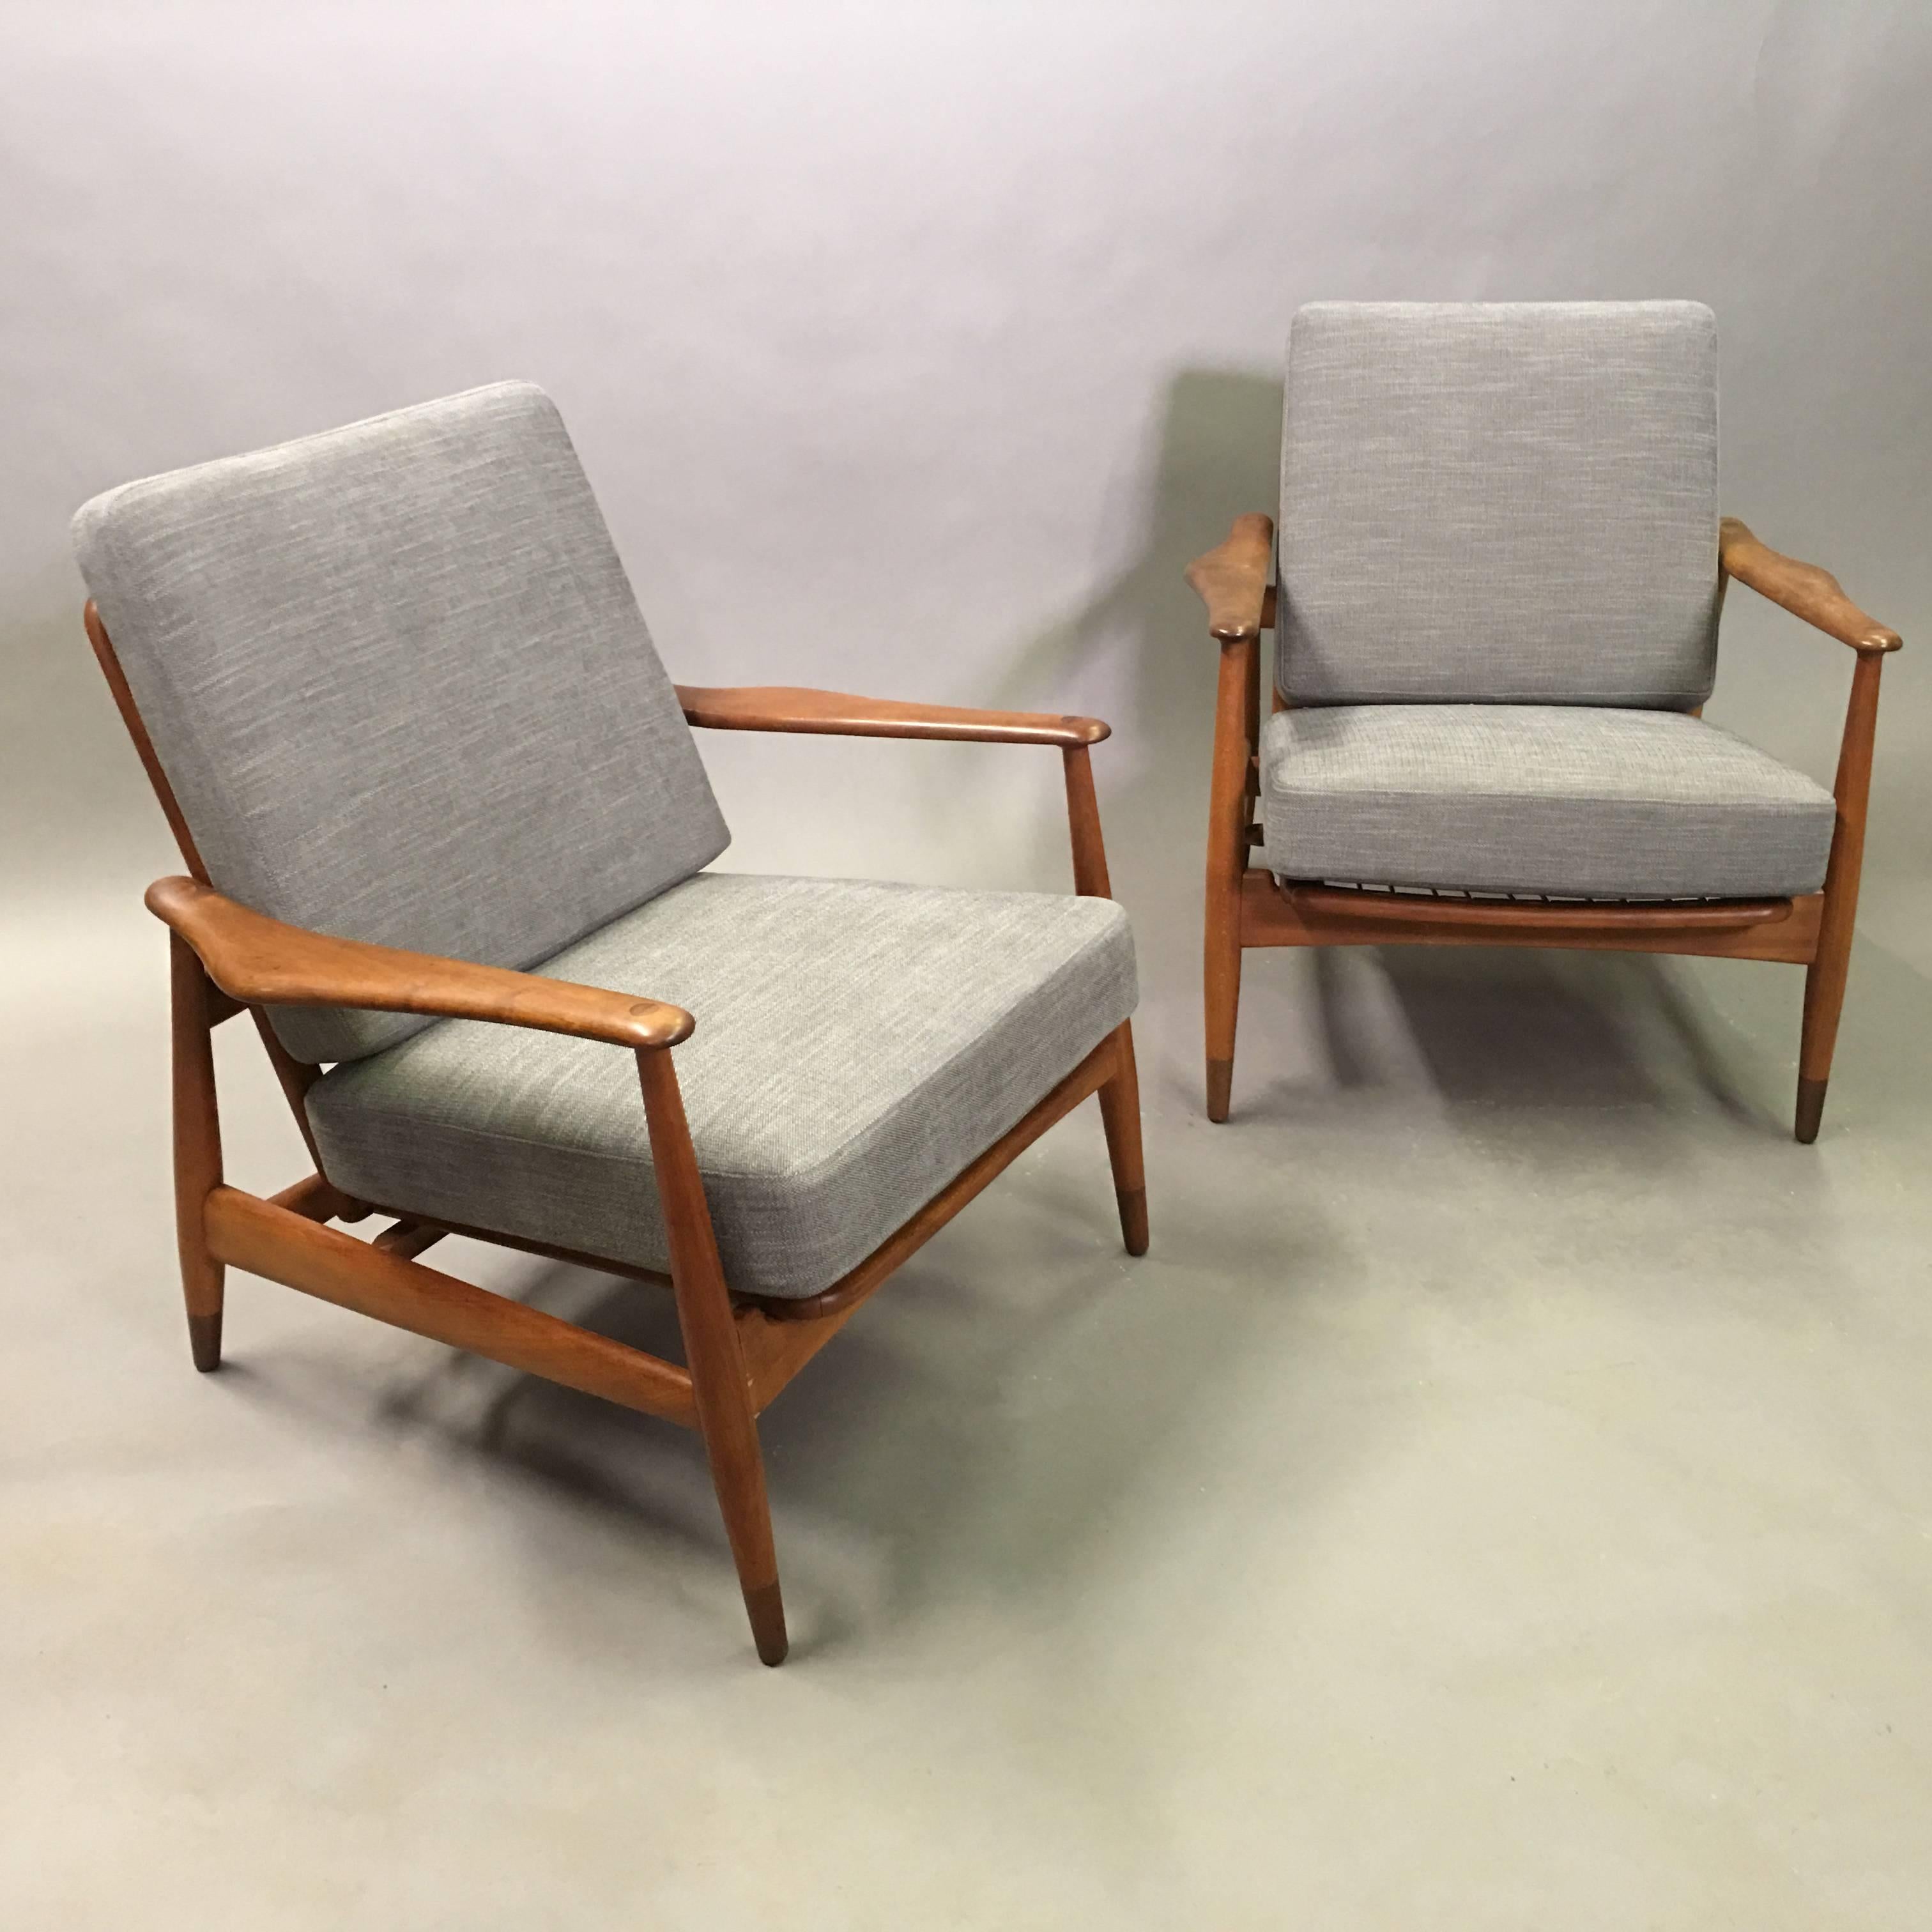 Pair of Danish modern, lounge chairs designed by Finn Juhl for John Stuart with newly restored chestnut frames and newly upholstered cushions in medium gray cotton linen blend.